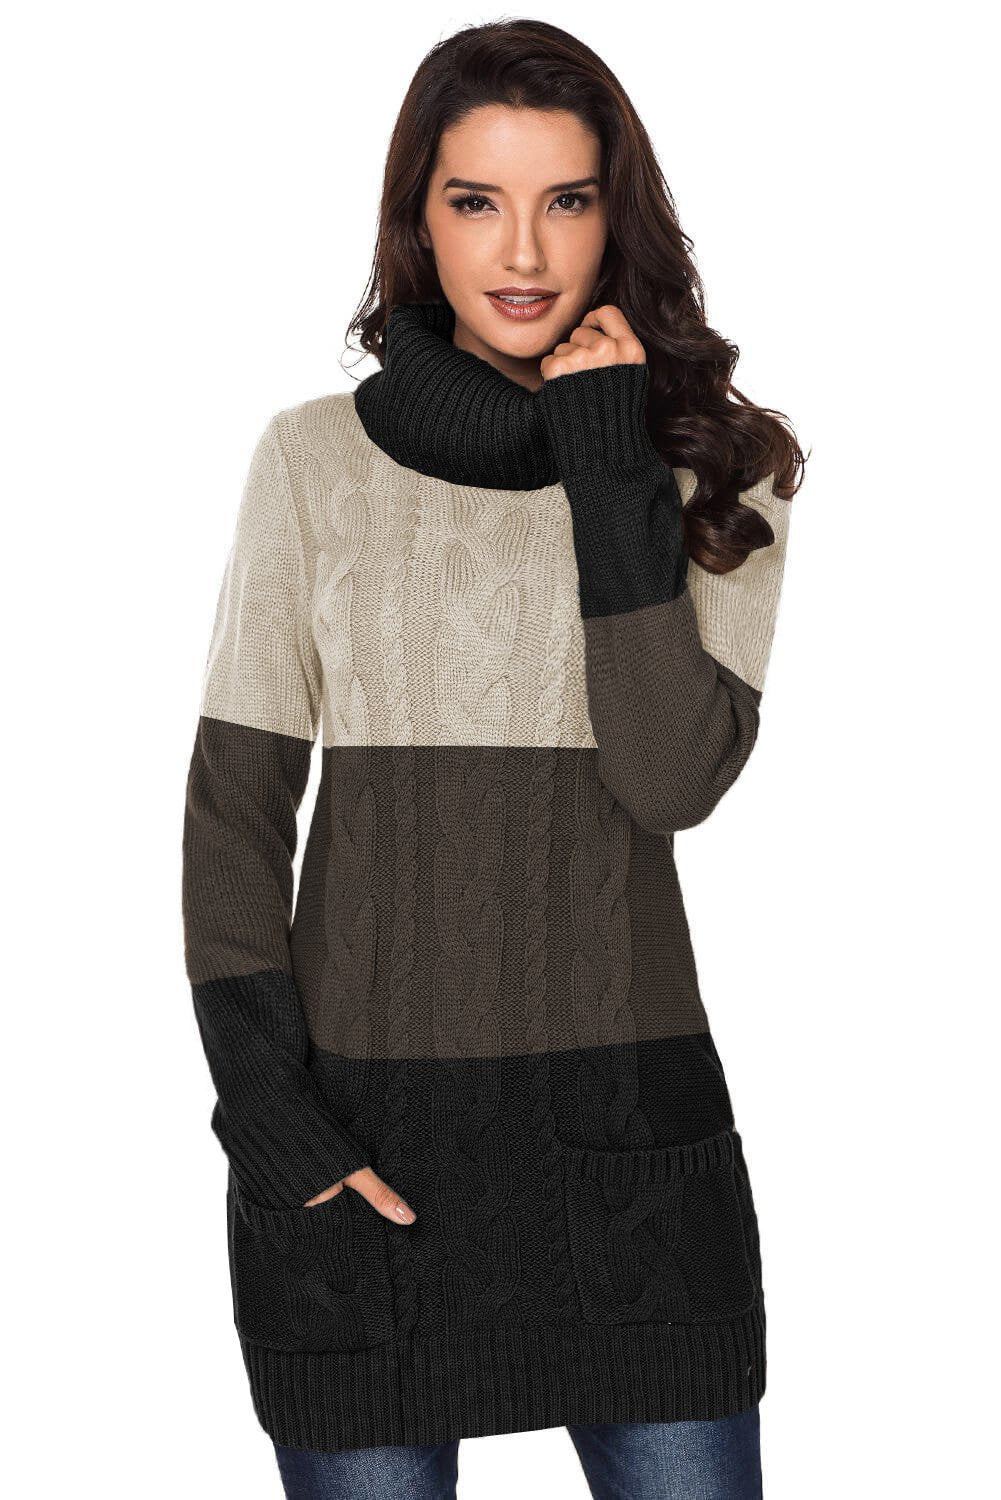 Brown Colorblock Pockets Cowl Neck Cable Knit Sweater Dress